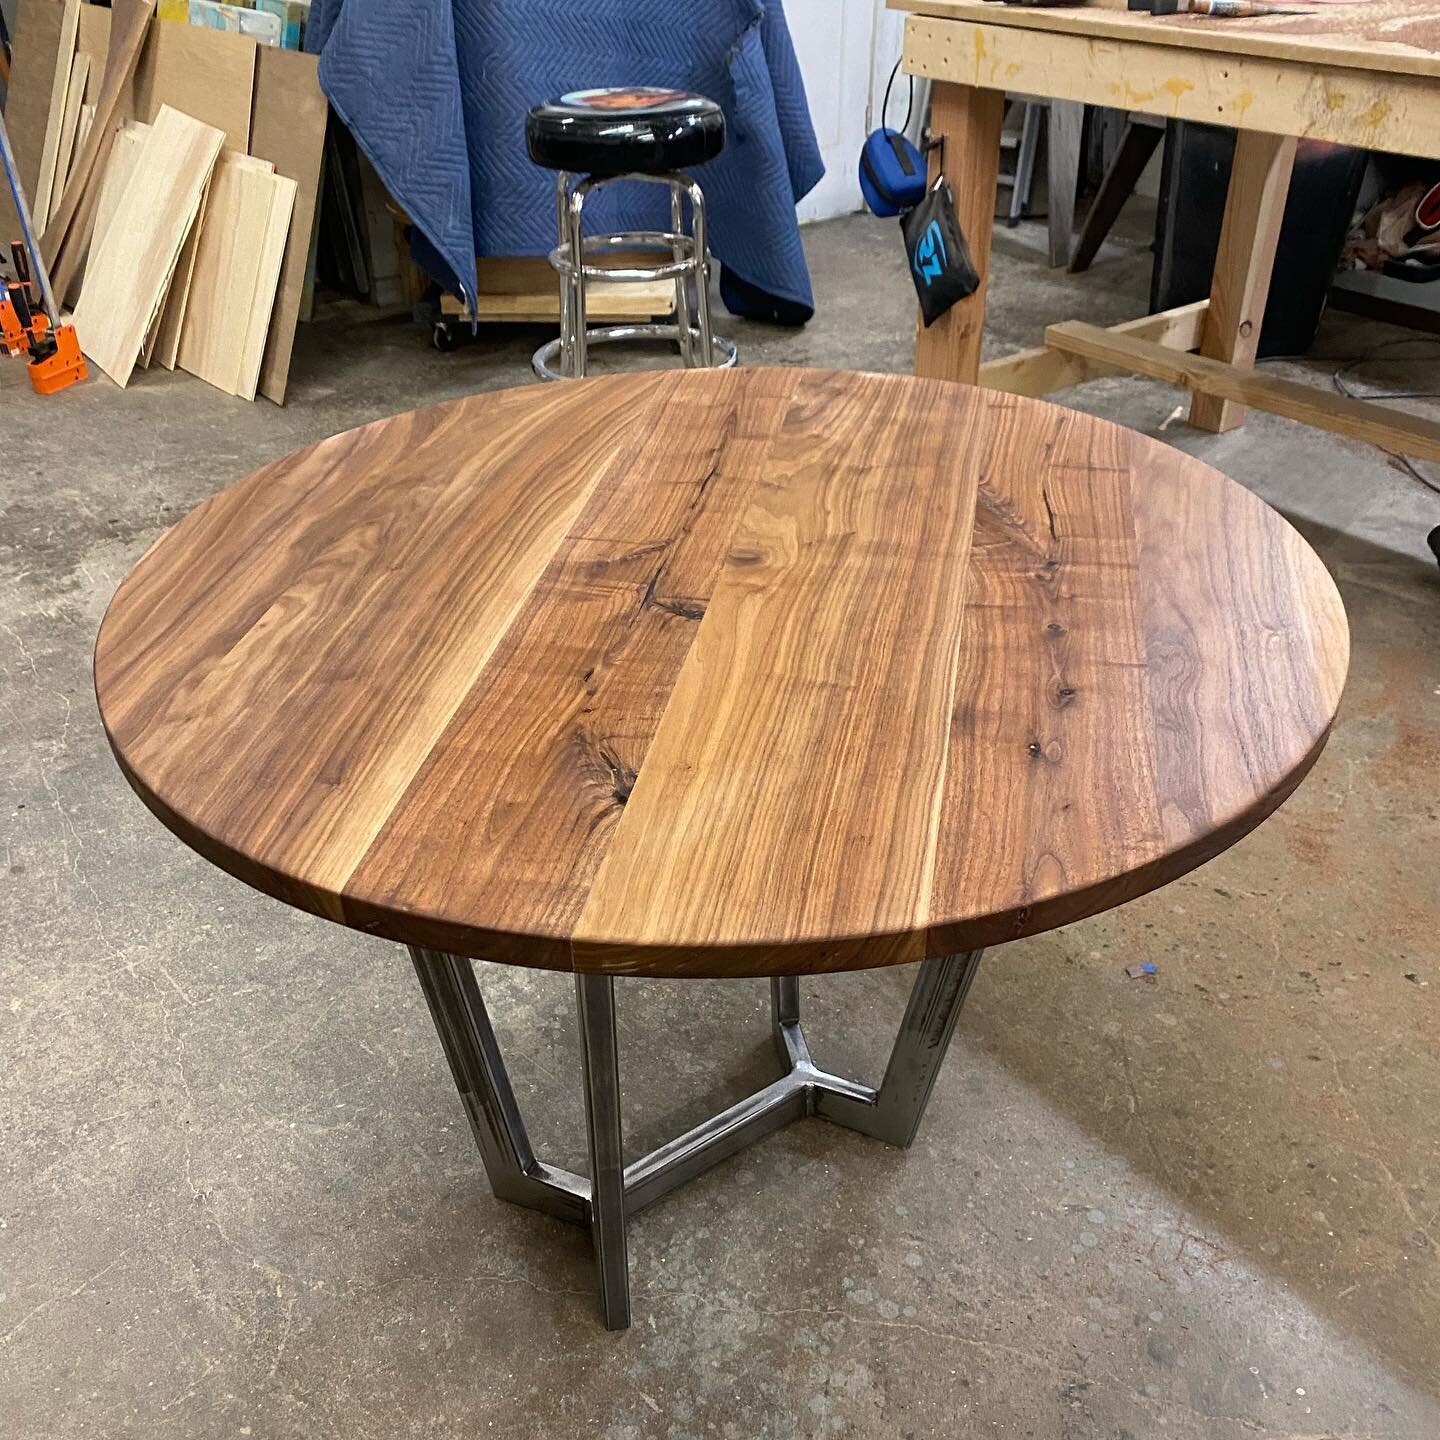 This was a fun one! Solid walnut top with the molecule style welded base. 
.
.
.
#handcrafted #madeinaustin #austin #texas #woodworker #furnituremaker #furniture #custom #customfurniture #customfurnituredesign #designer #shoplife #art #studio #workha